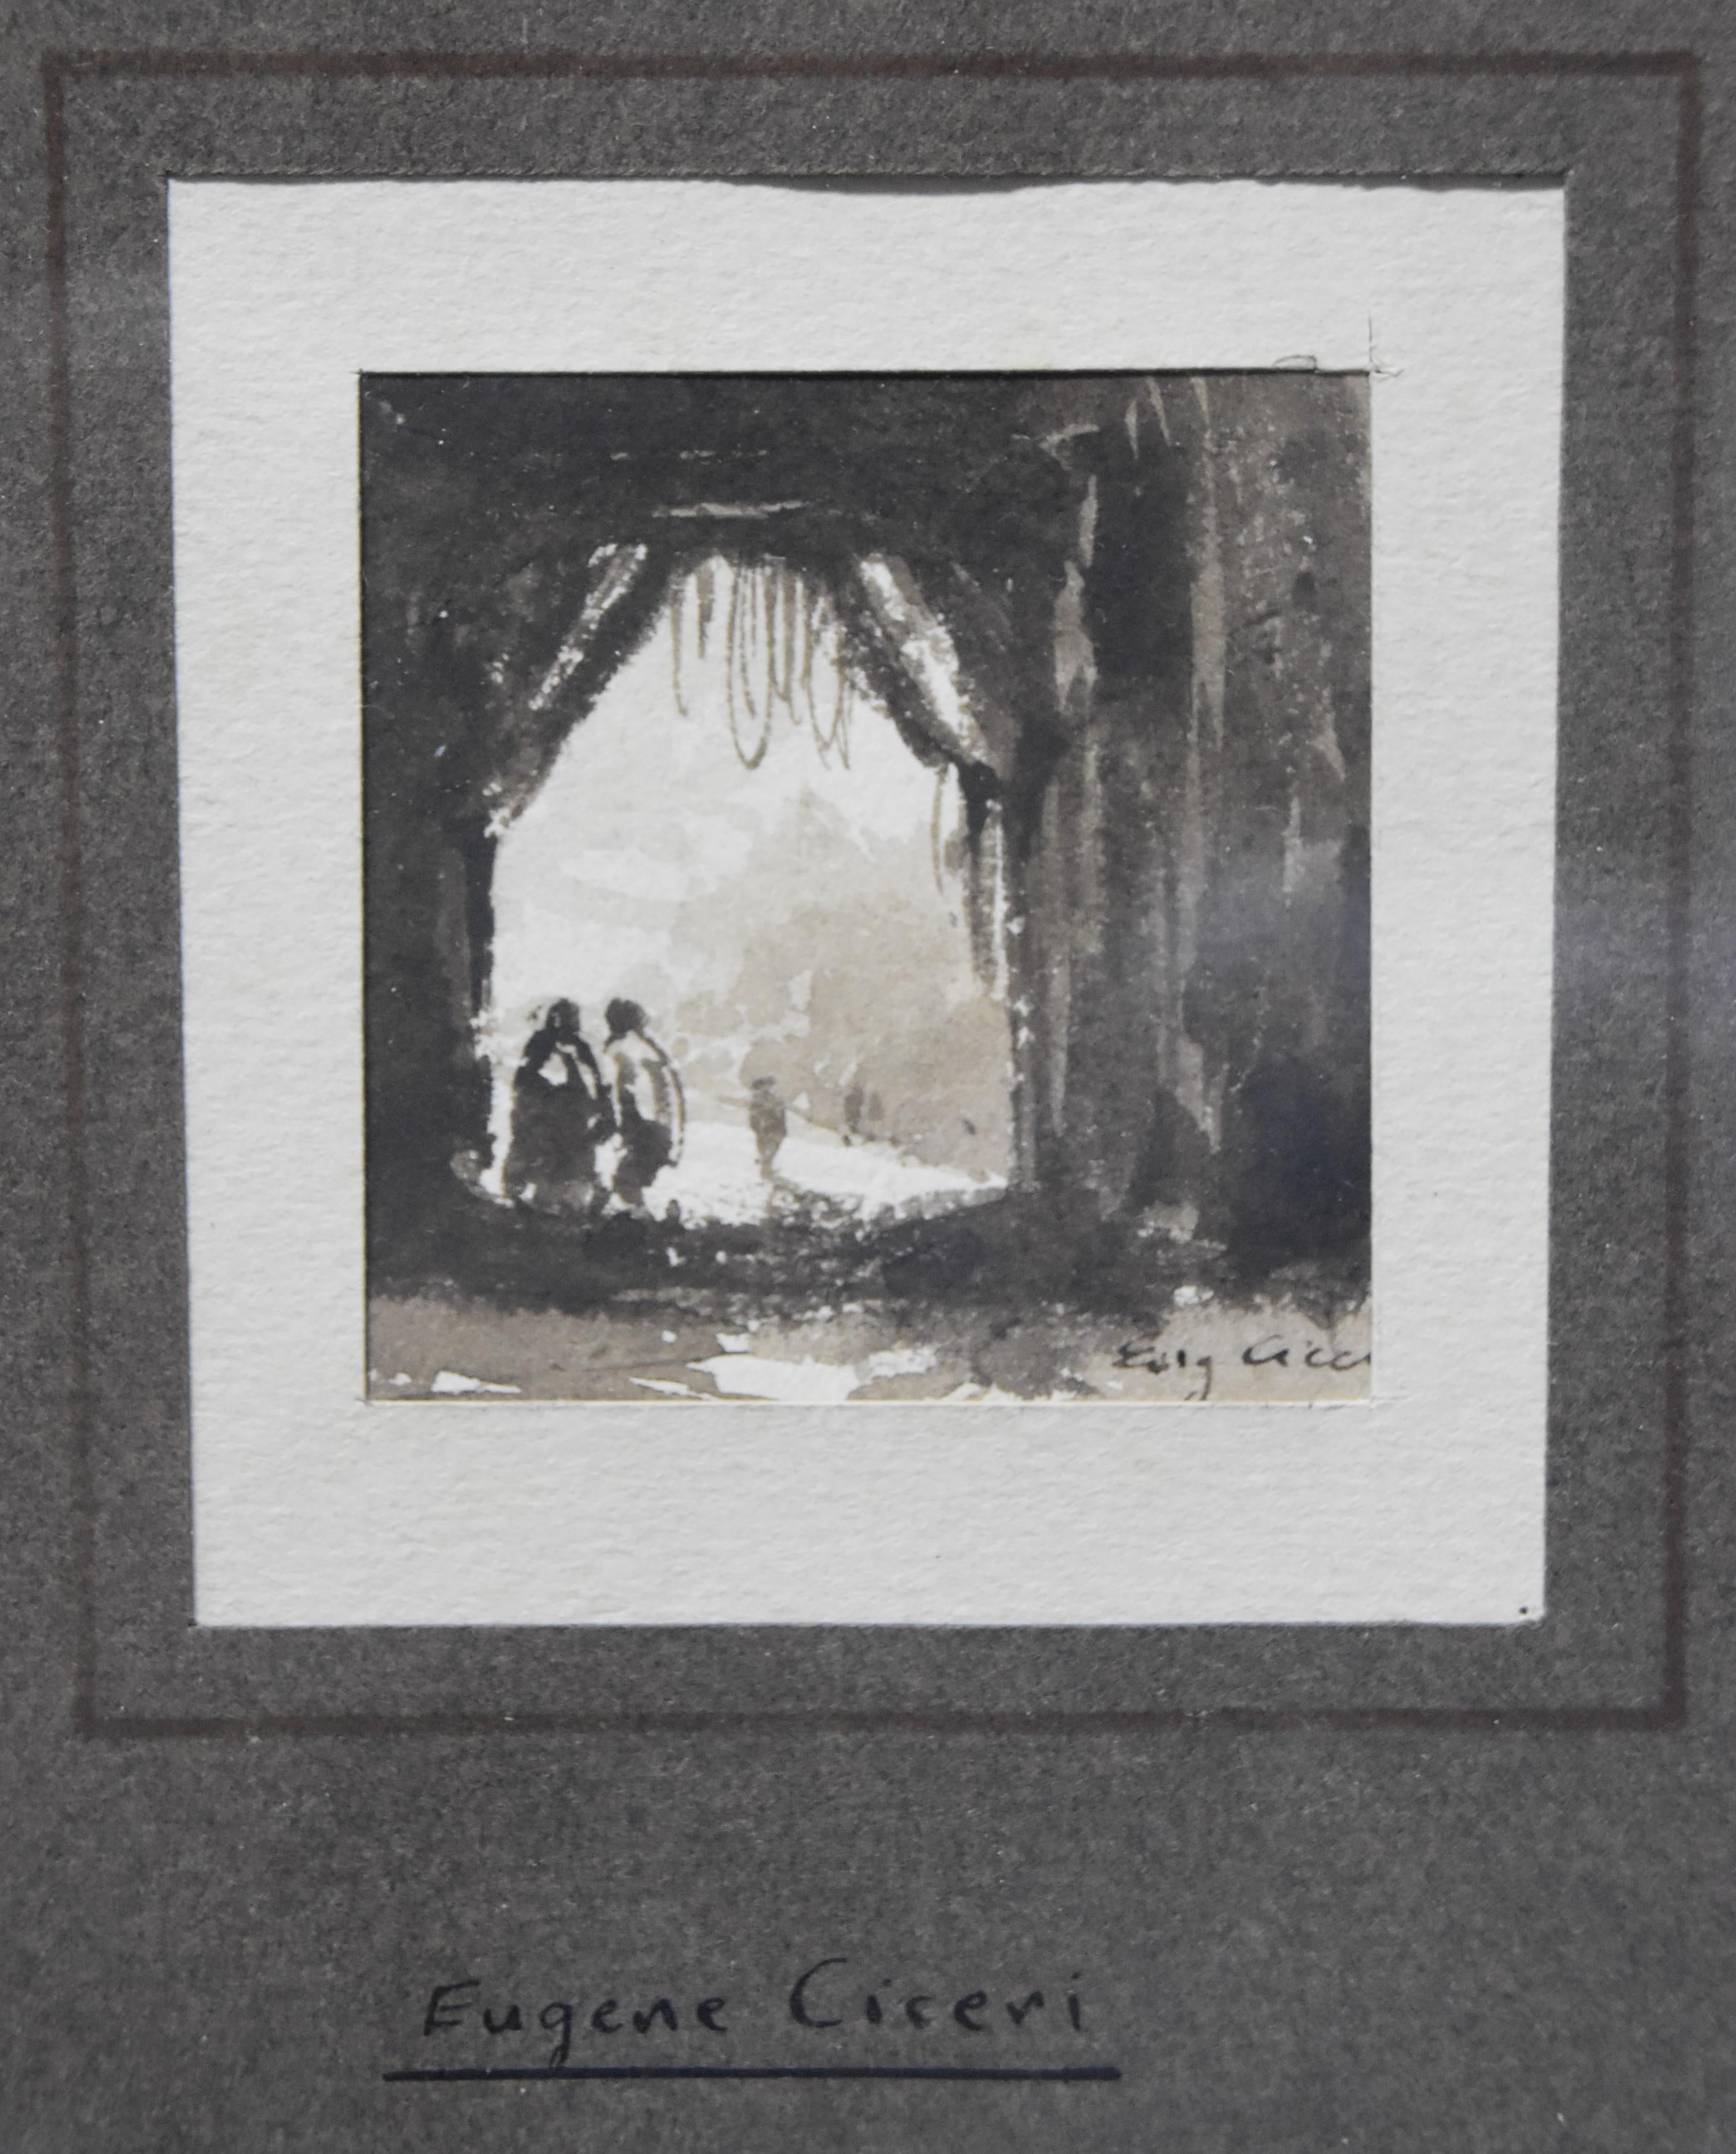 Eugène Cicéri (1813-1890) A fantastic scene, small drawing signed and framed - Art by Eugene Ciceri